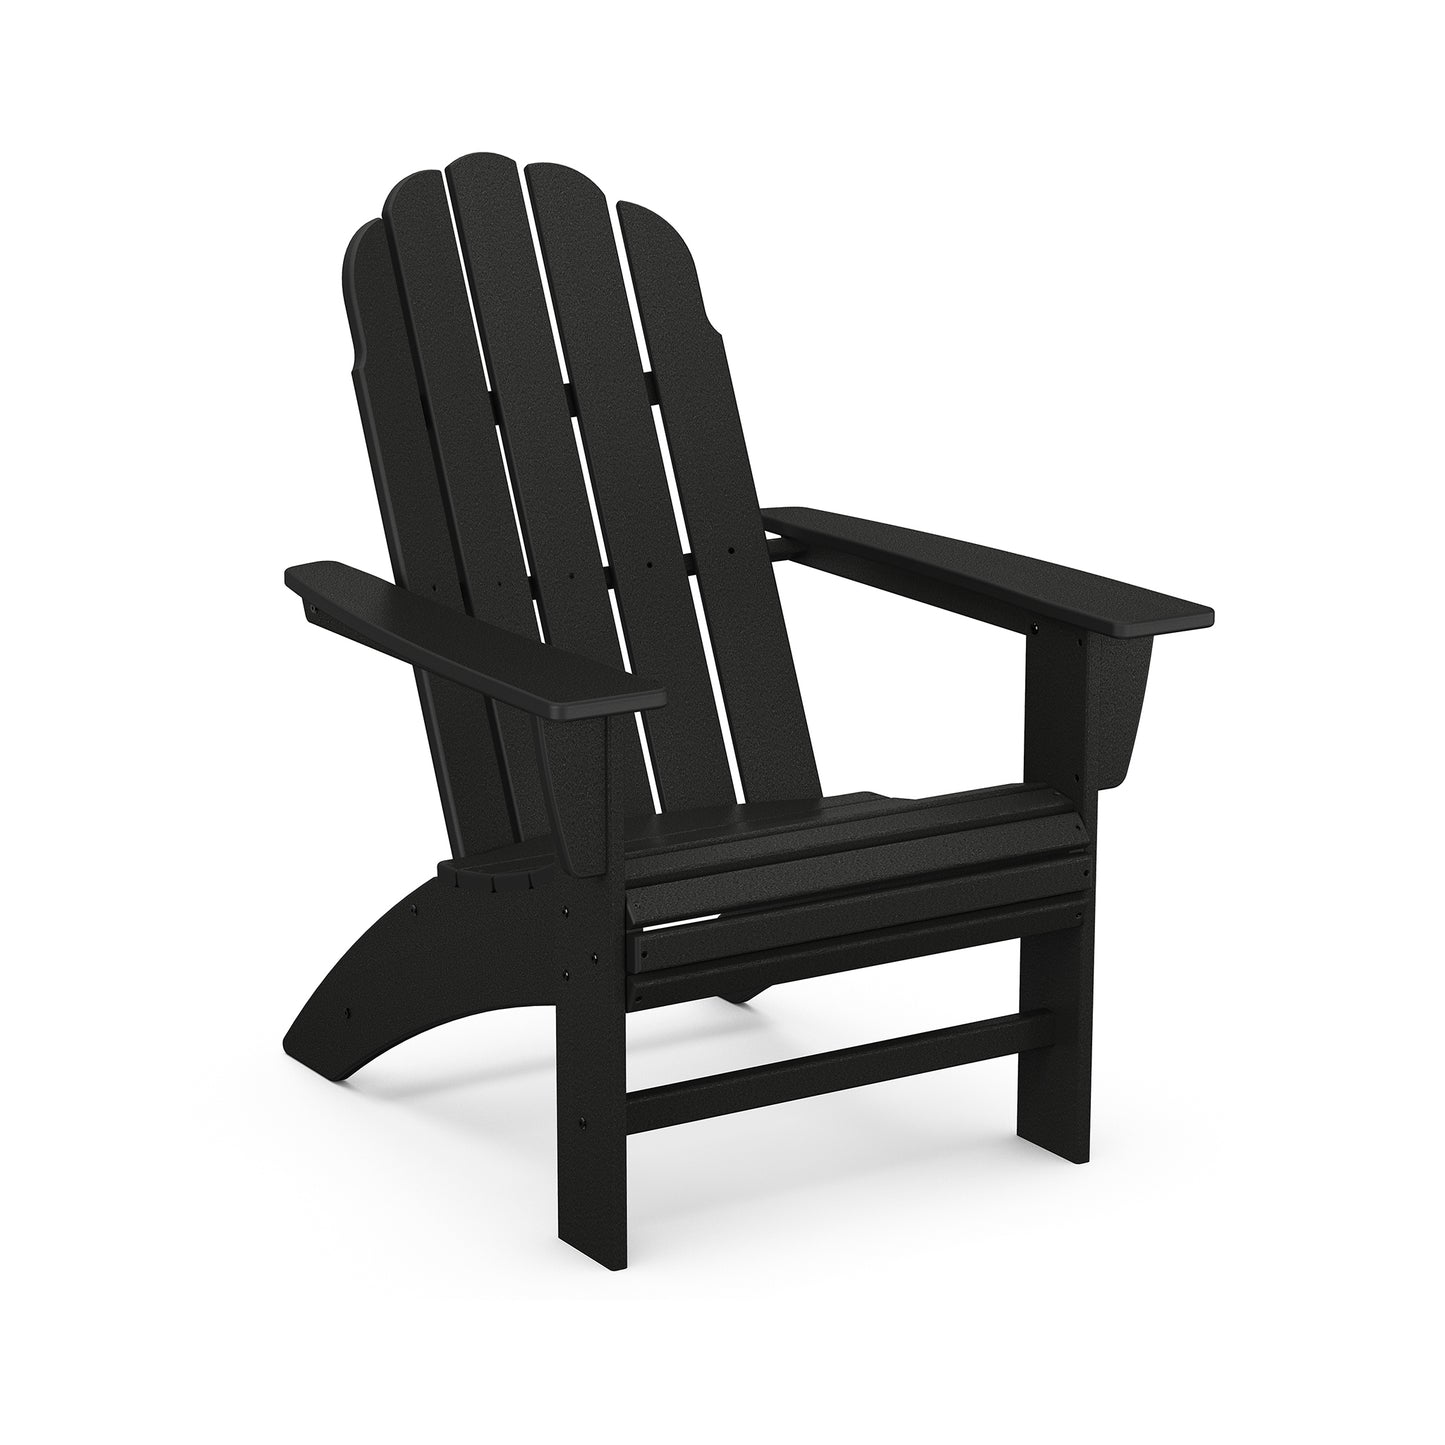 A black POLYWOOD® Vineyard Curveback Adirondack chair made of plastic, featuring a high back and wide armrests, isolated on a white background.